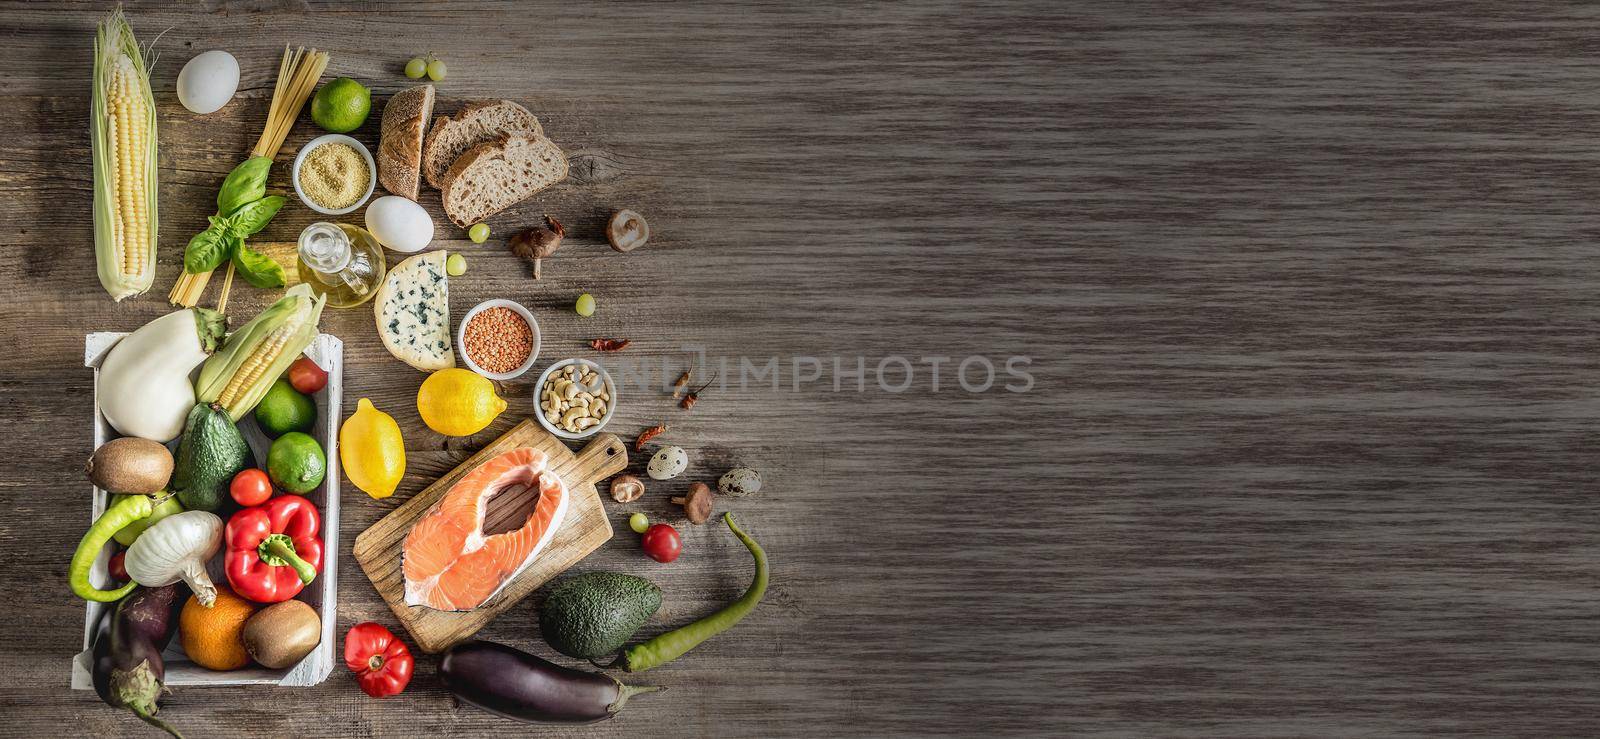 Healthy organic nutritious diet. Plenty of foods on the wooden table.